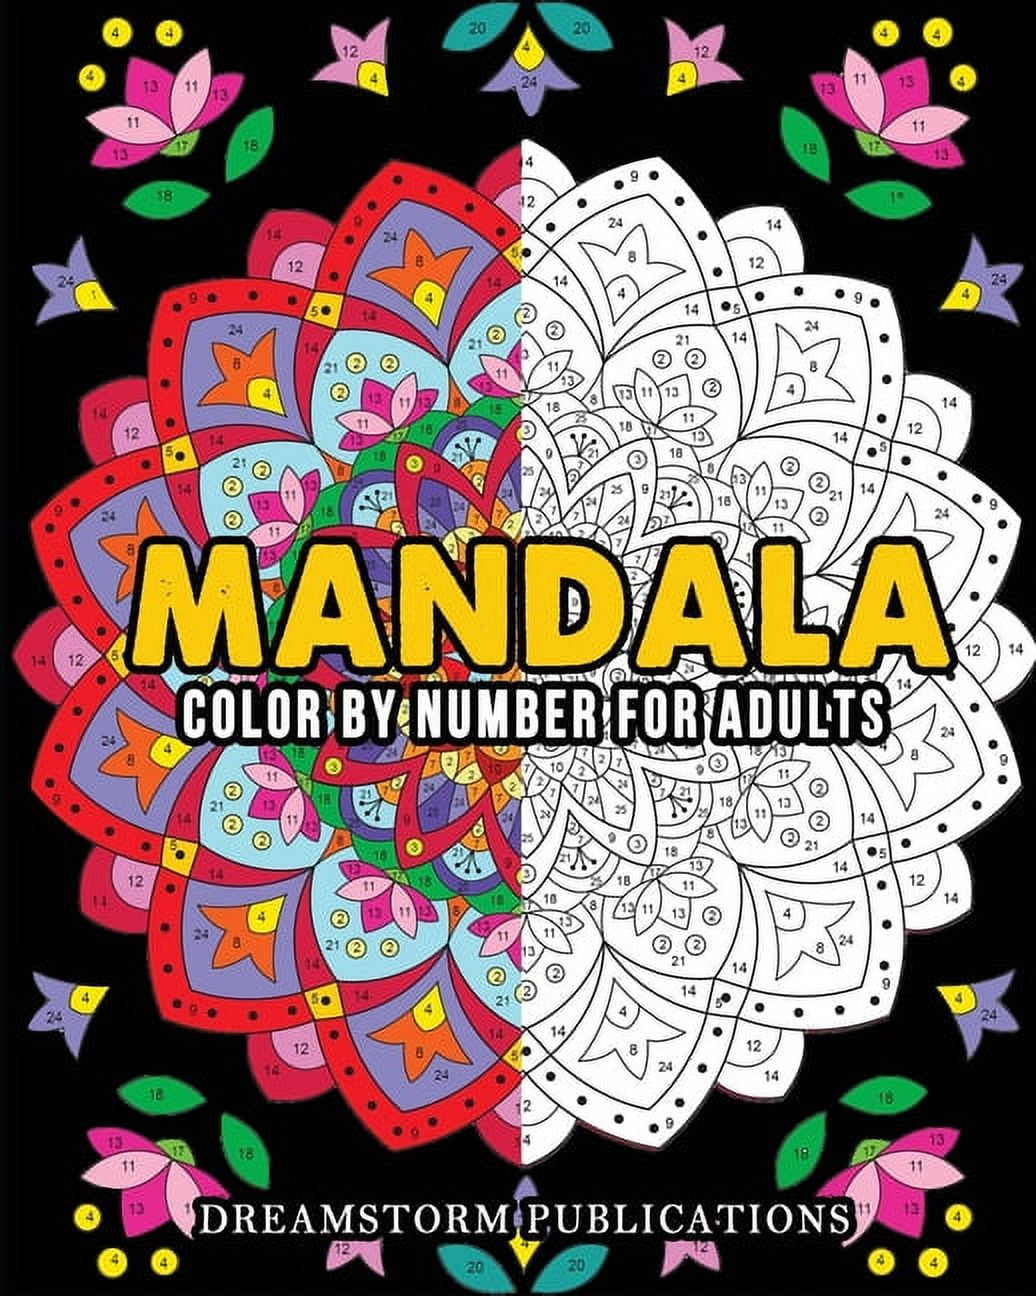 Mandala Color By Number: An Adult Color By Number Coloring Book